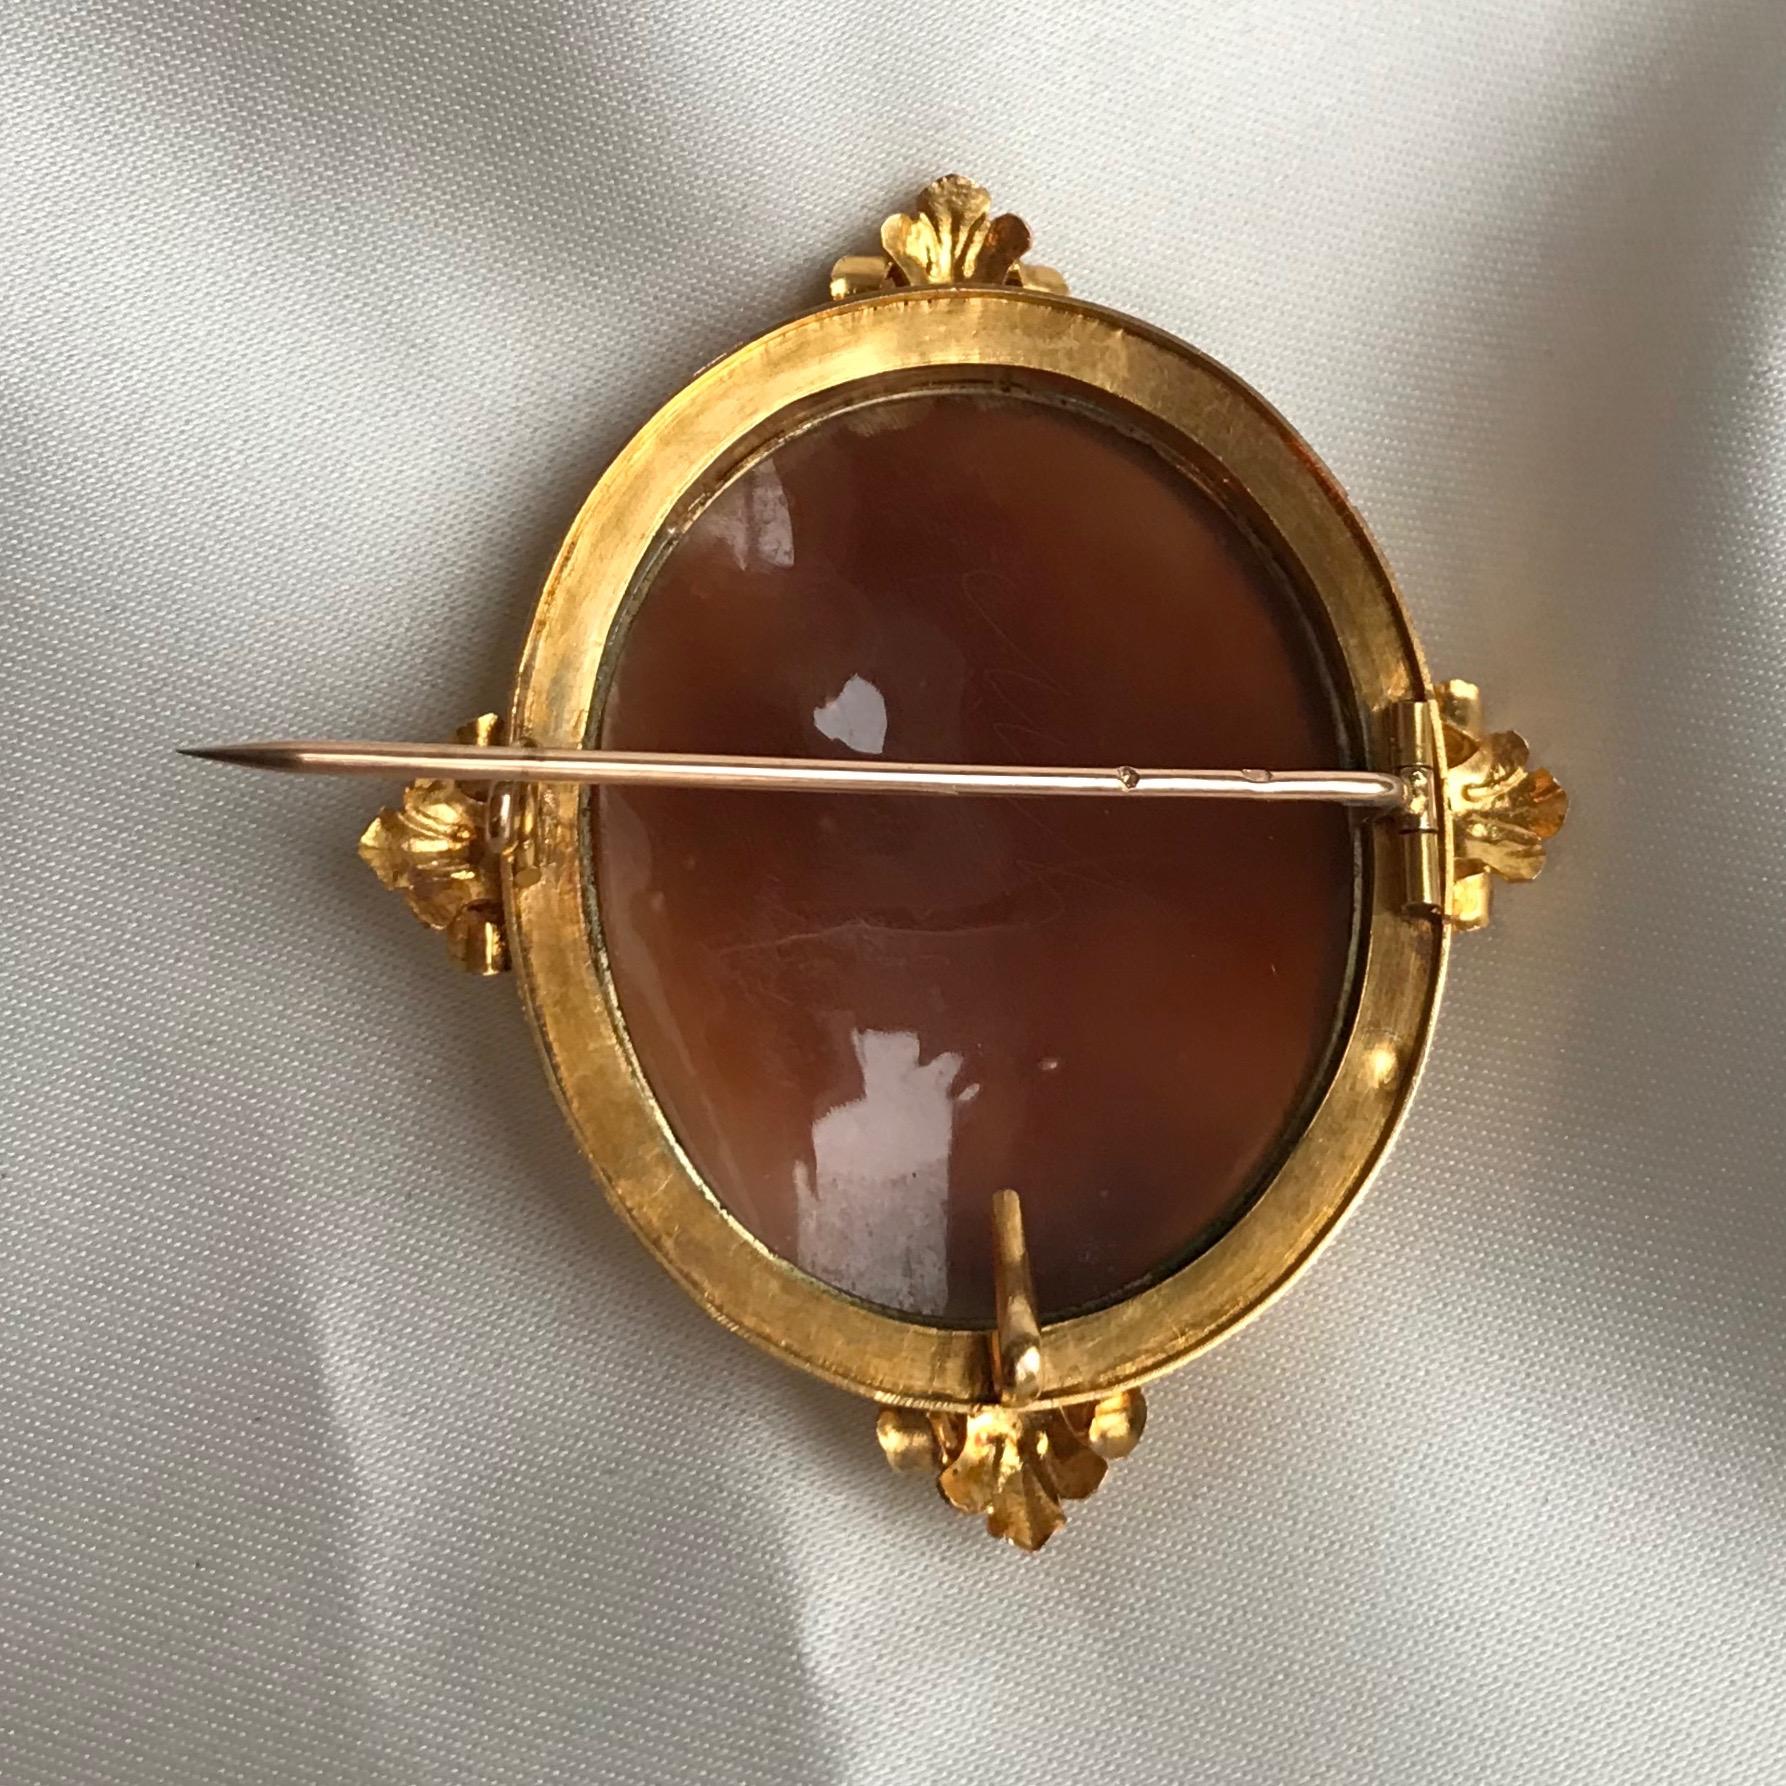 Women's or Men's  Froment-Meurice Set in 18 Carat, Yellow Gold and Cameo, 19th Century